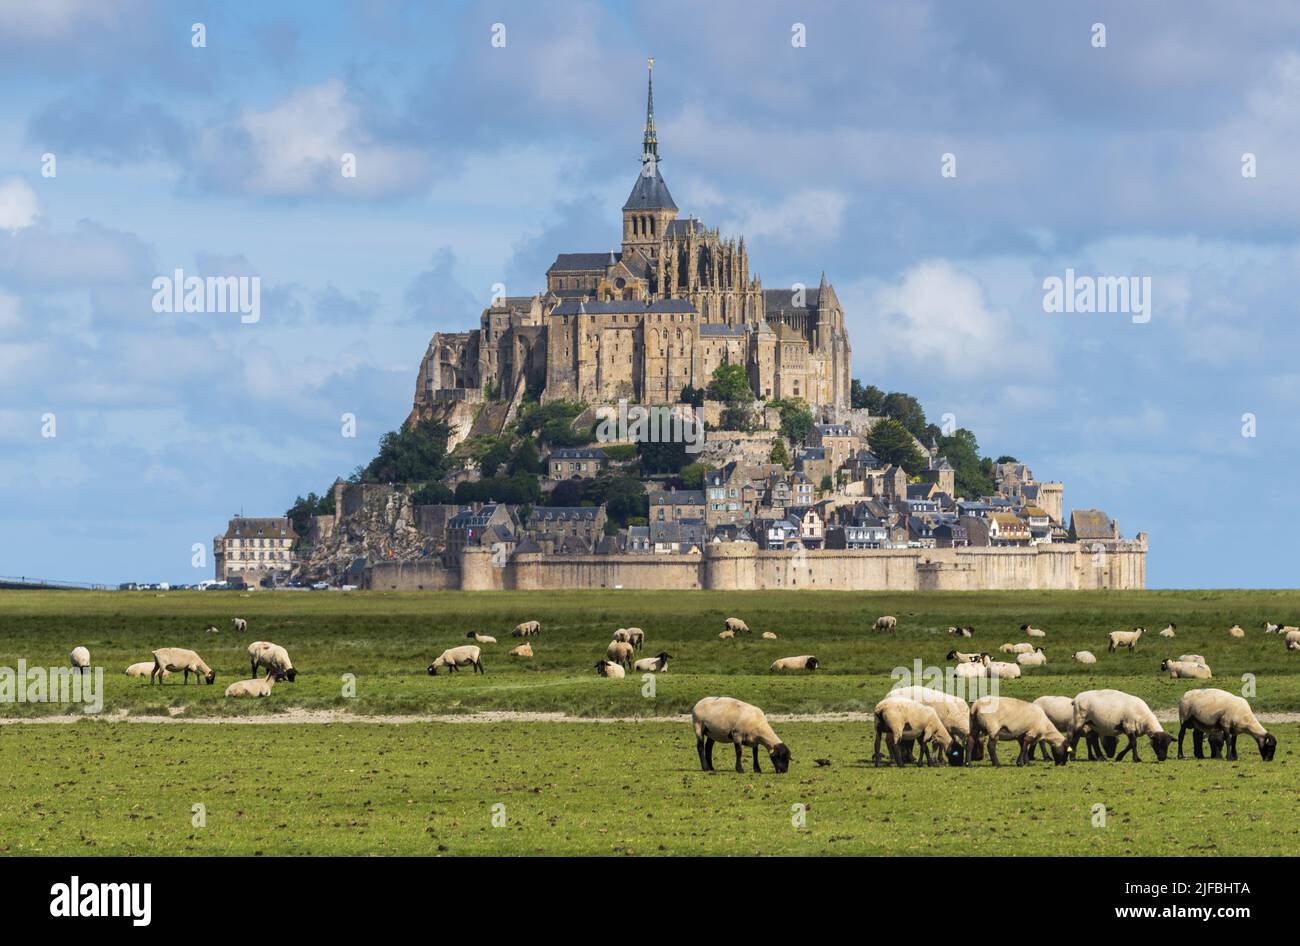 France, Manche, Mont Saint Michel Bay listed as World Heritage by UNESCO, Abbey of Mont Saint Michel, field of sheep Stock Photo